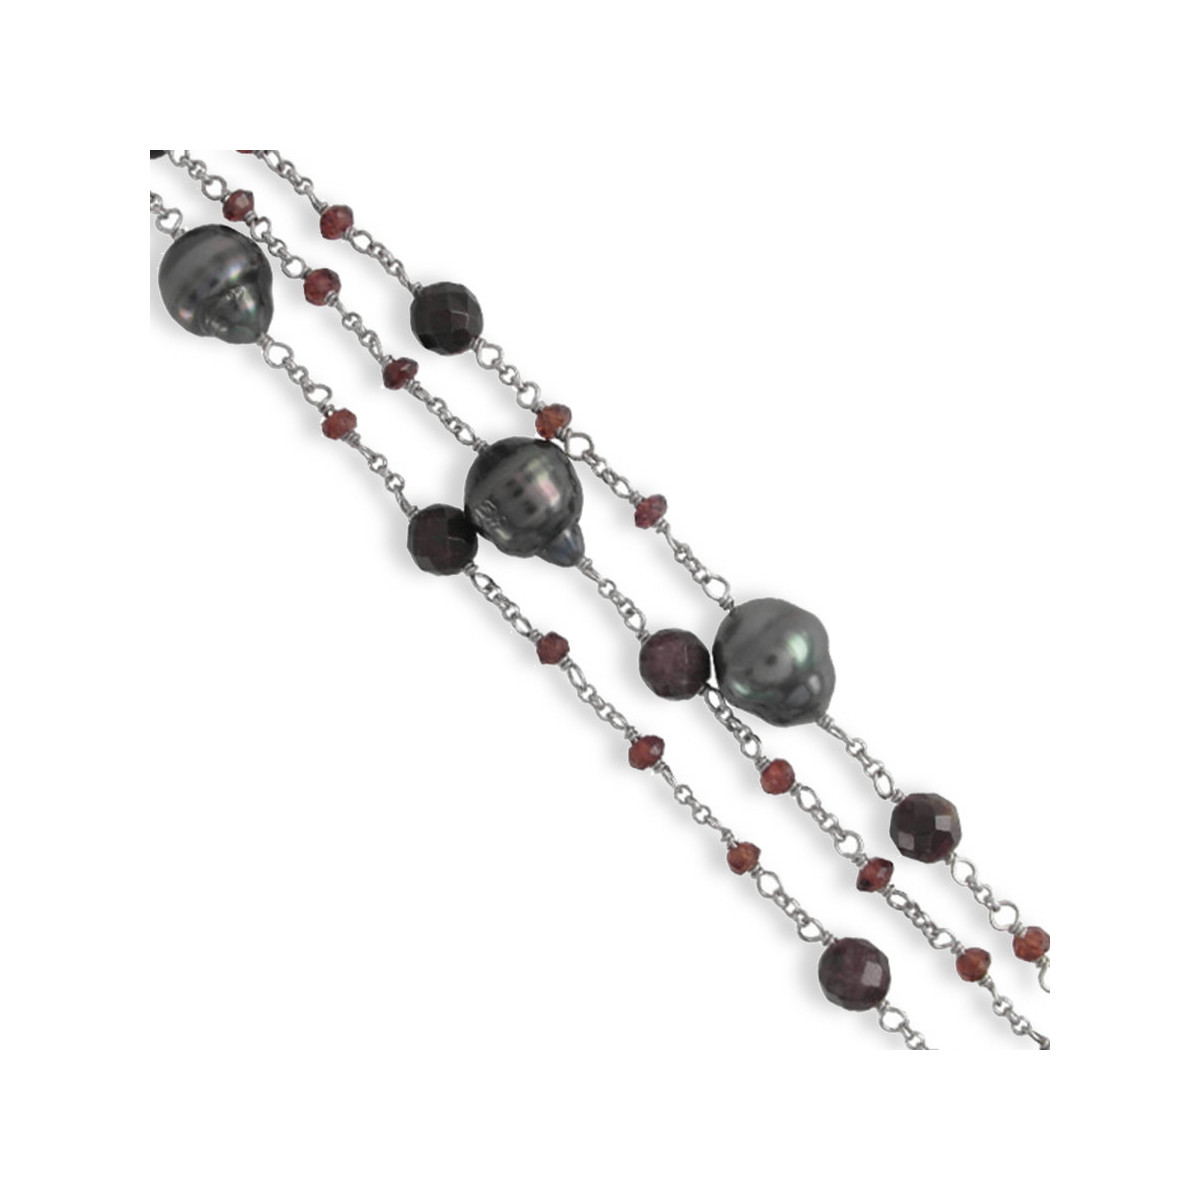 SILVER BRACELET GARNETS AND PEARLS